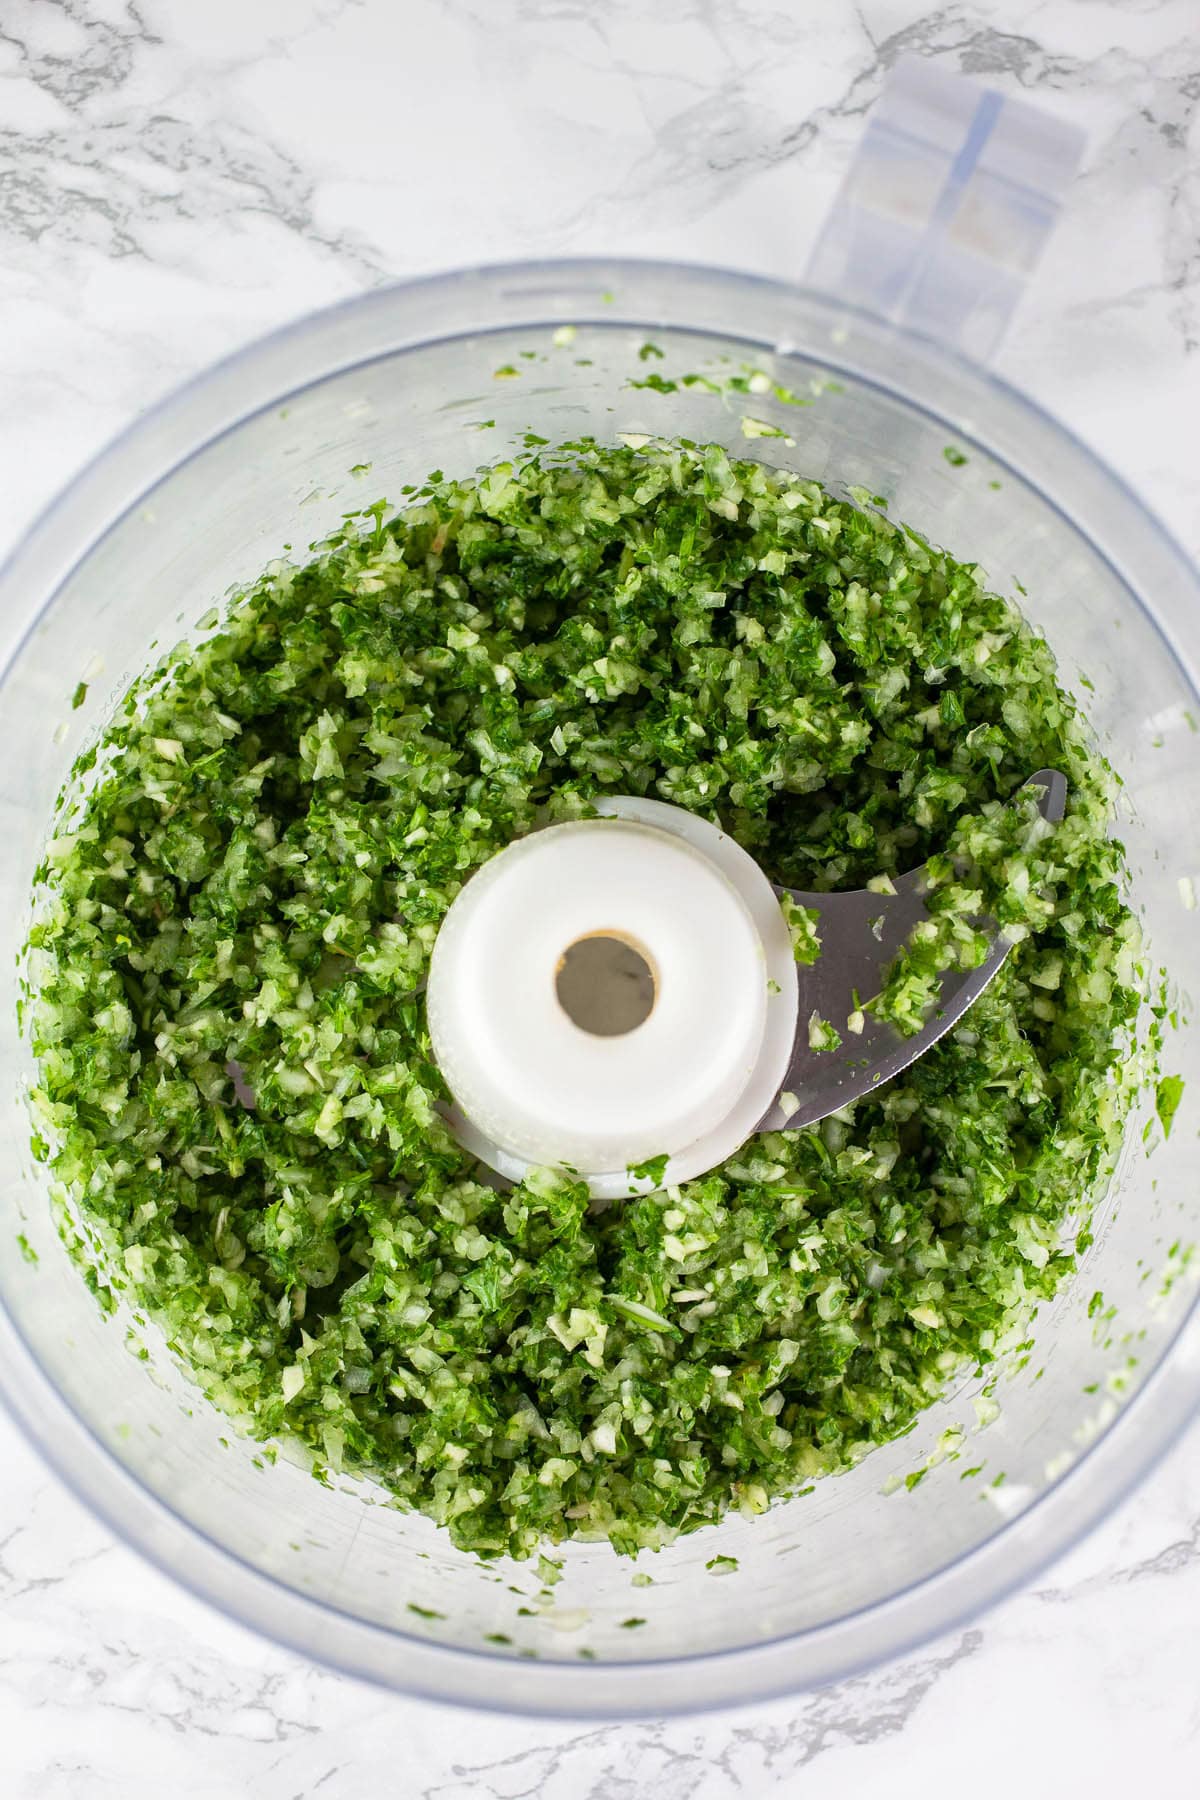 Parsley, mint, garlic, and onions pulsed in food processor.